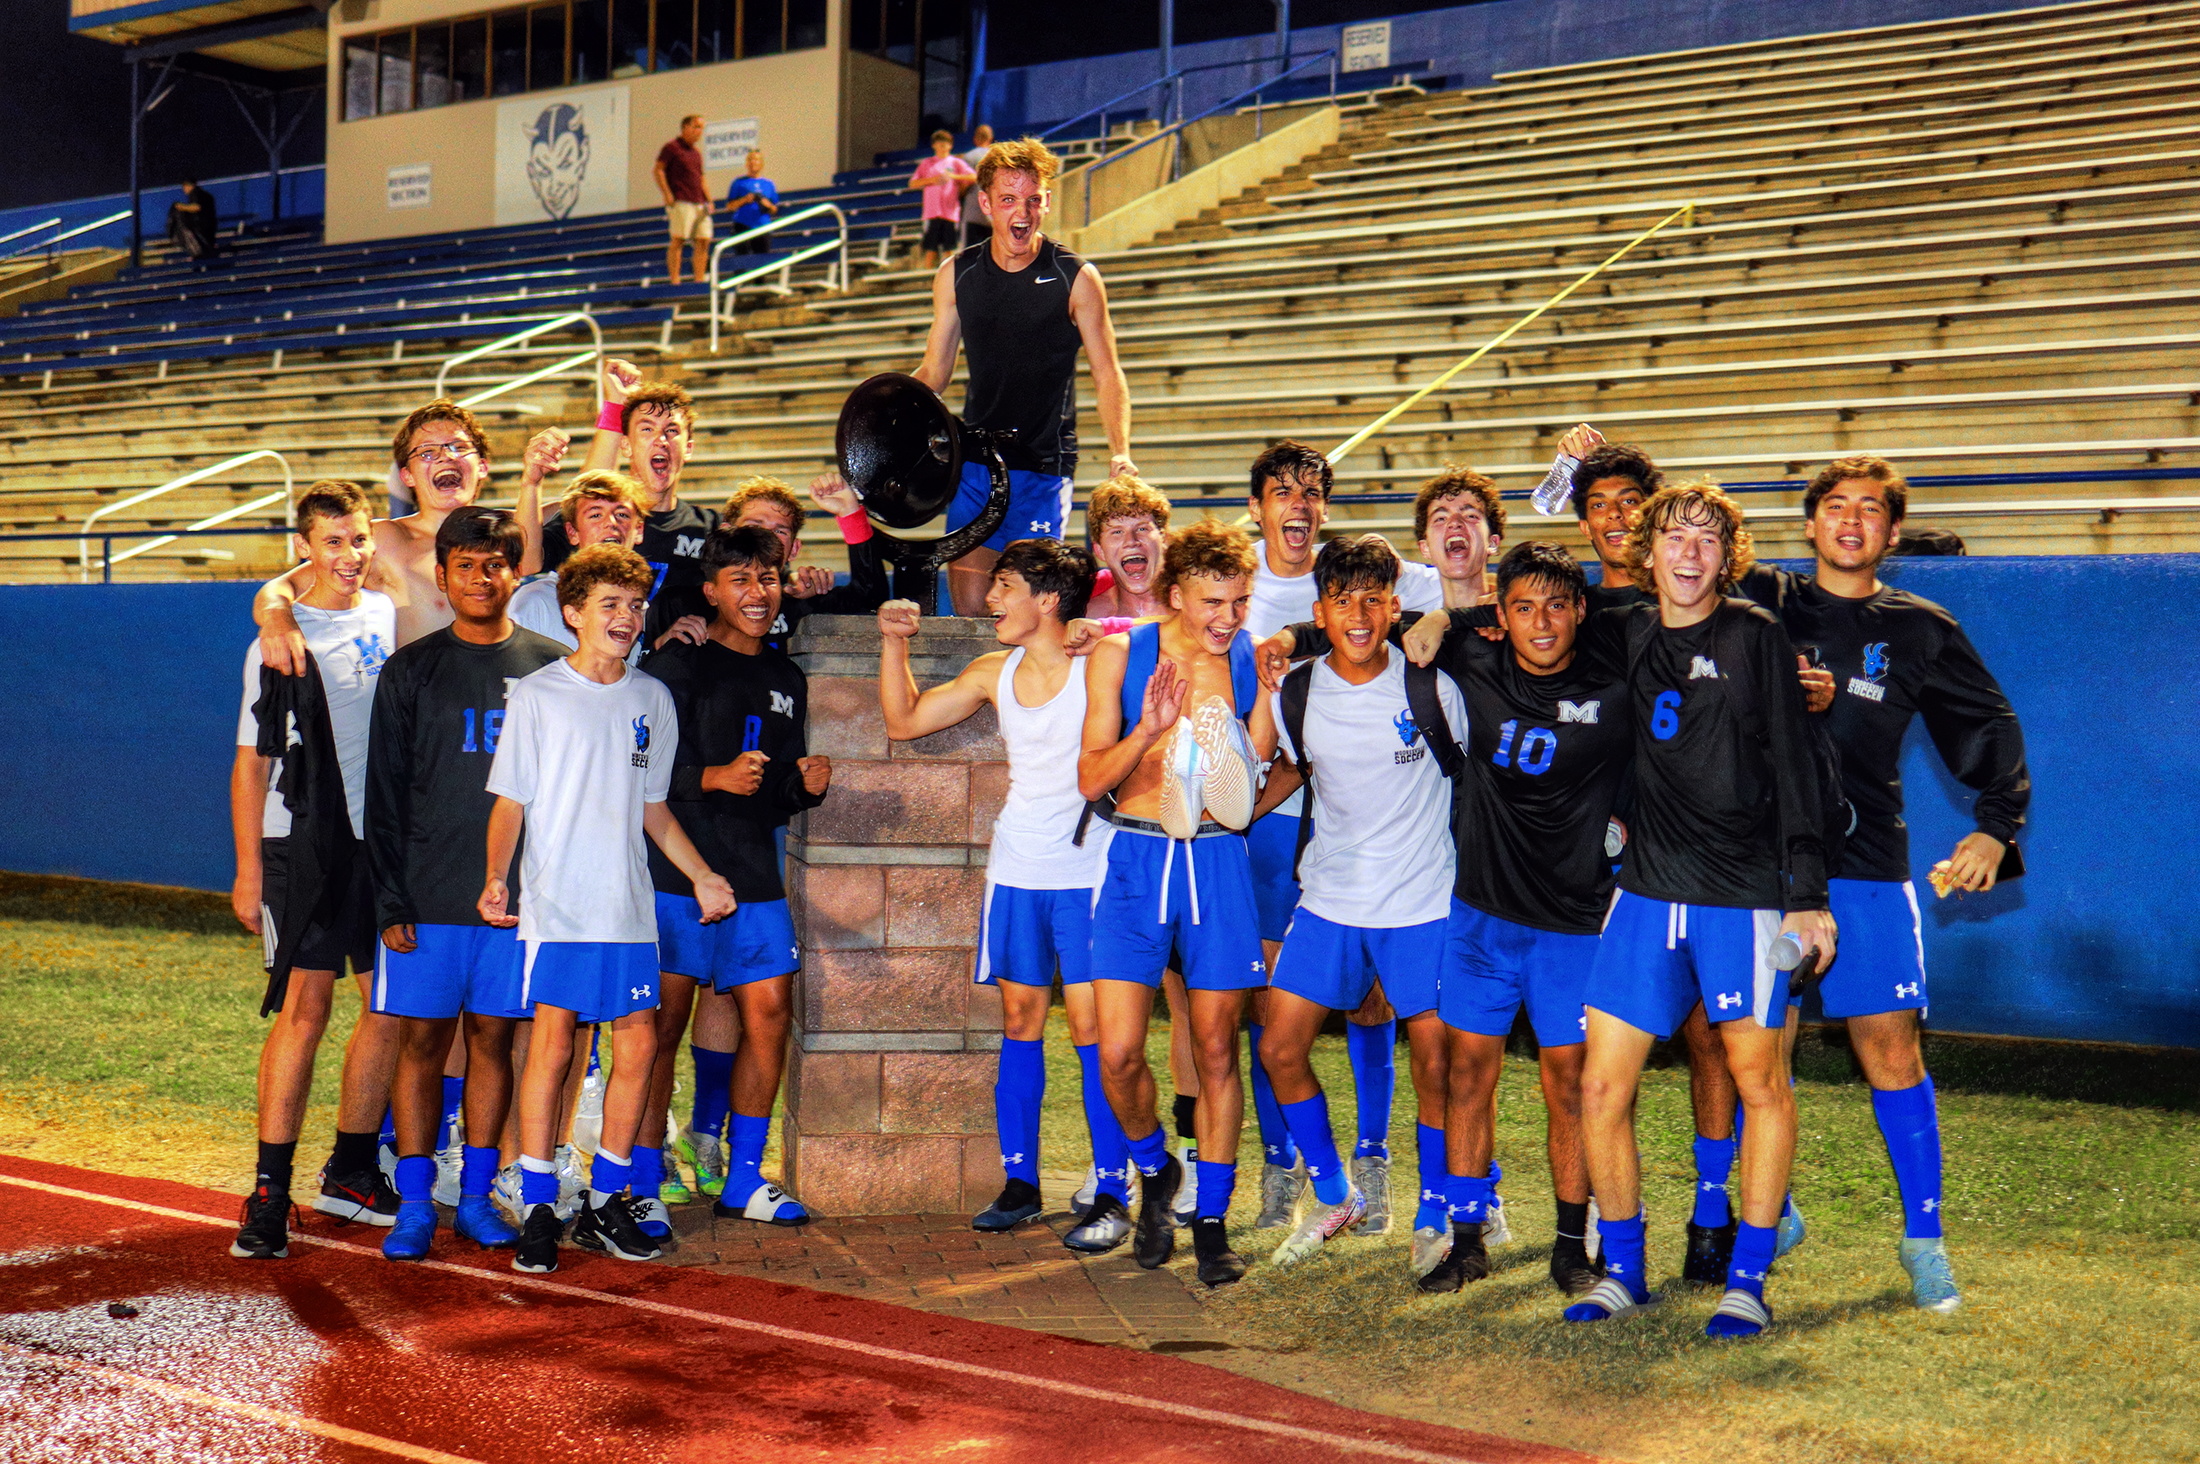 RING THAT BELL! Blue Devils defeat Wildcats 2-1